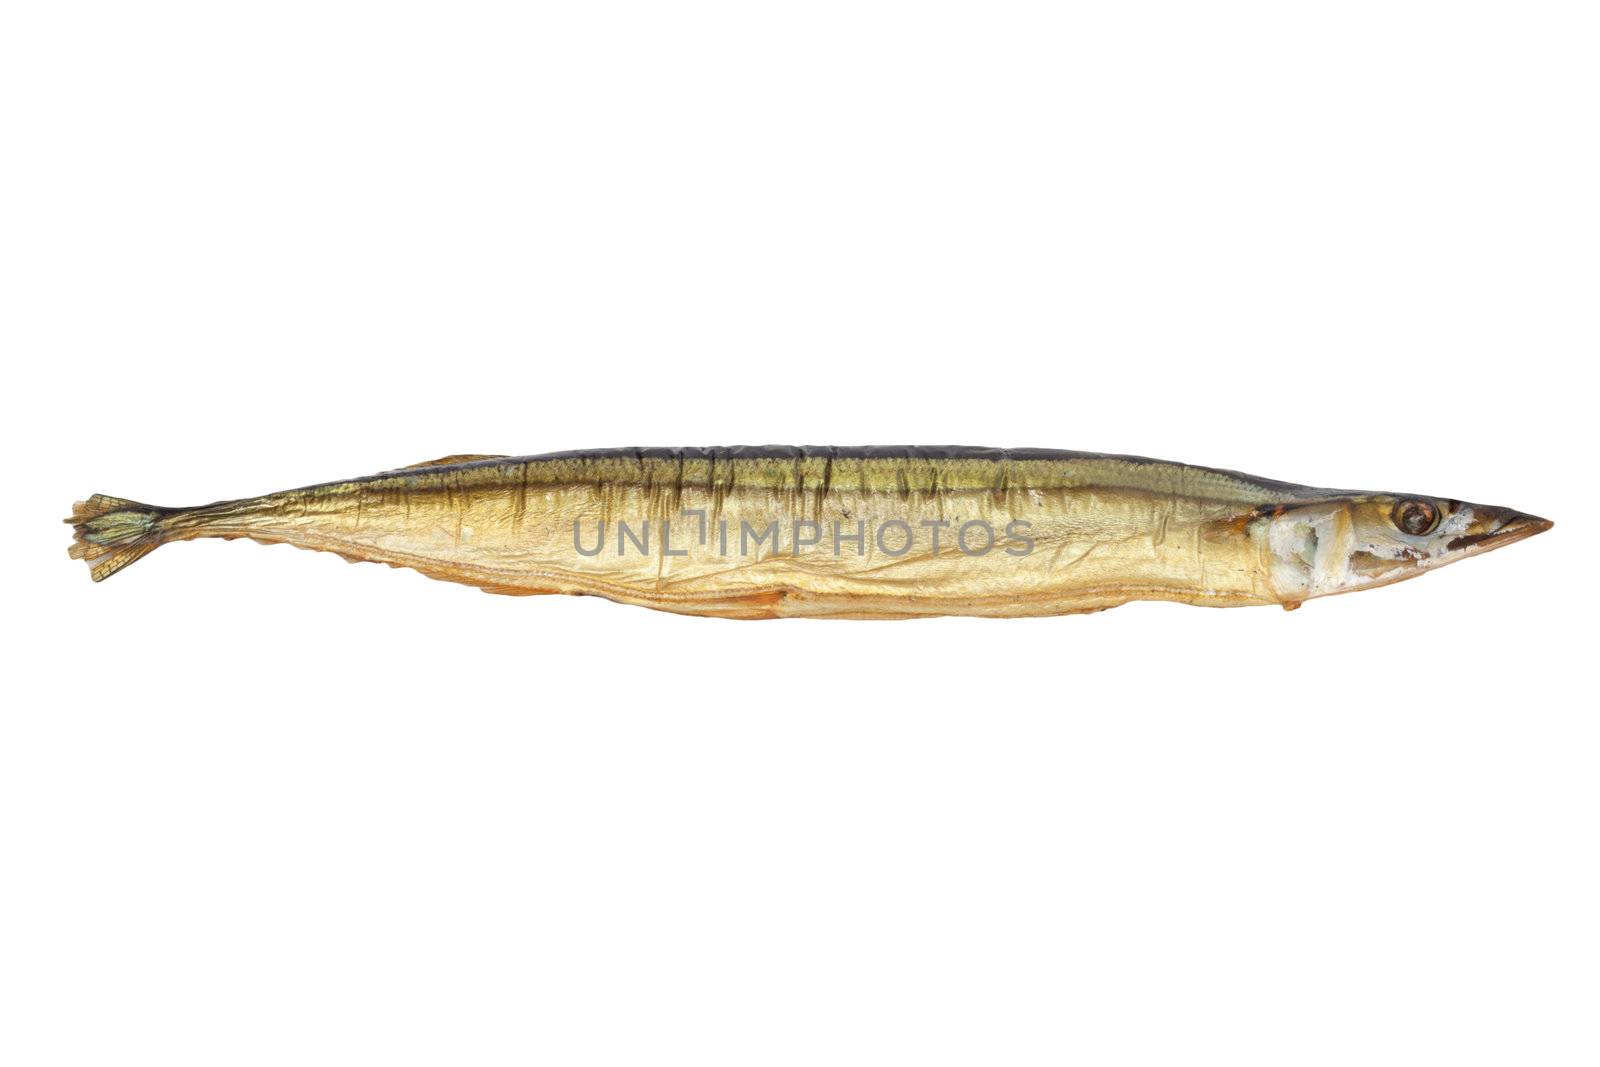 Smoked Saury on a white background